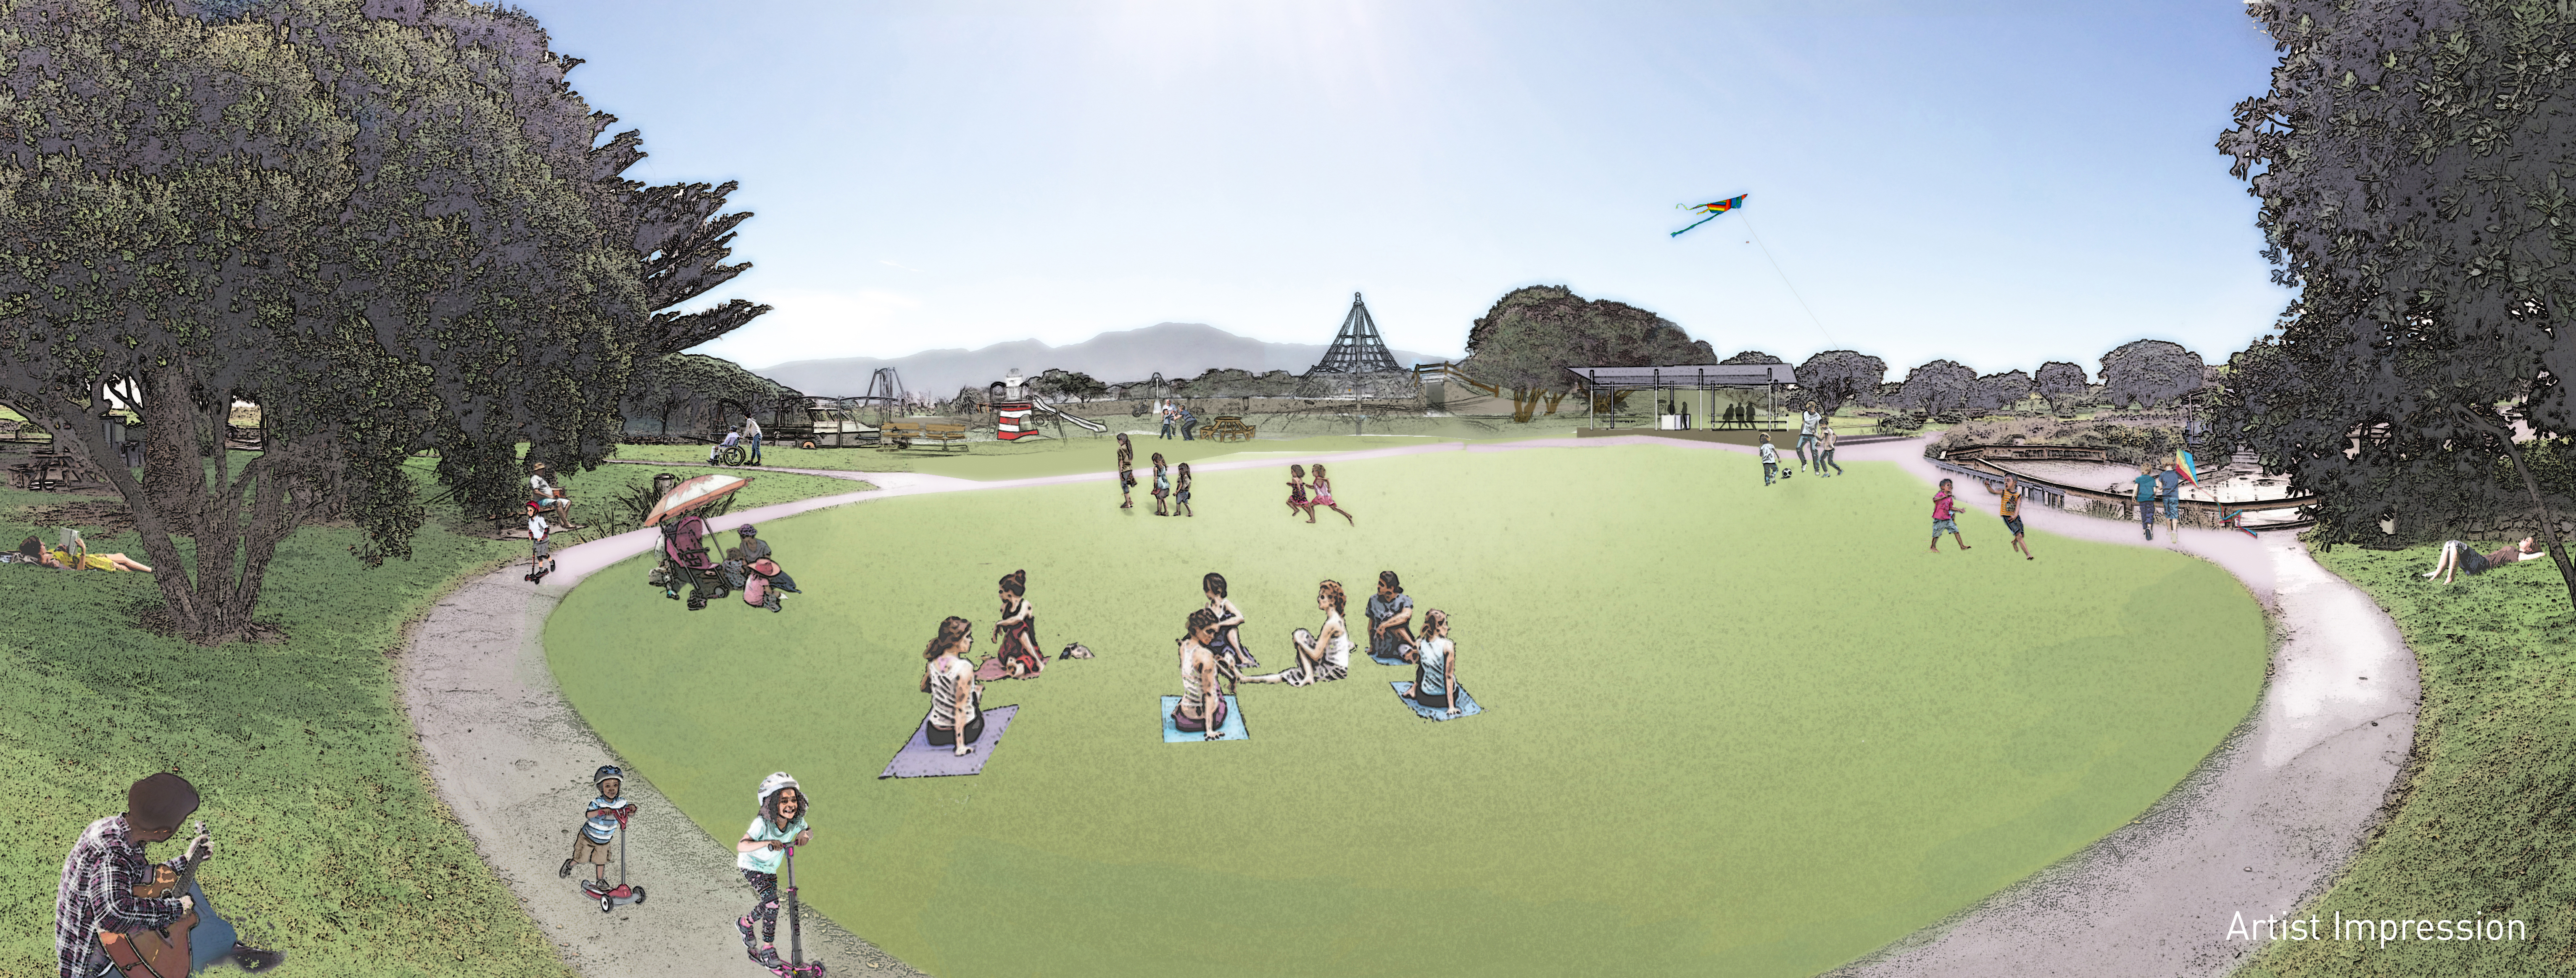 Artists impression of Maclean Park redevelopment looking northwest